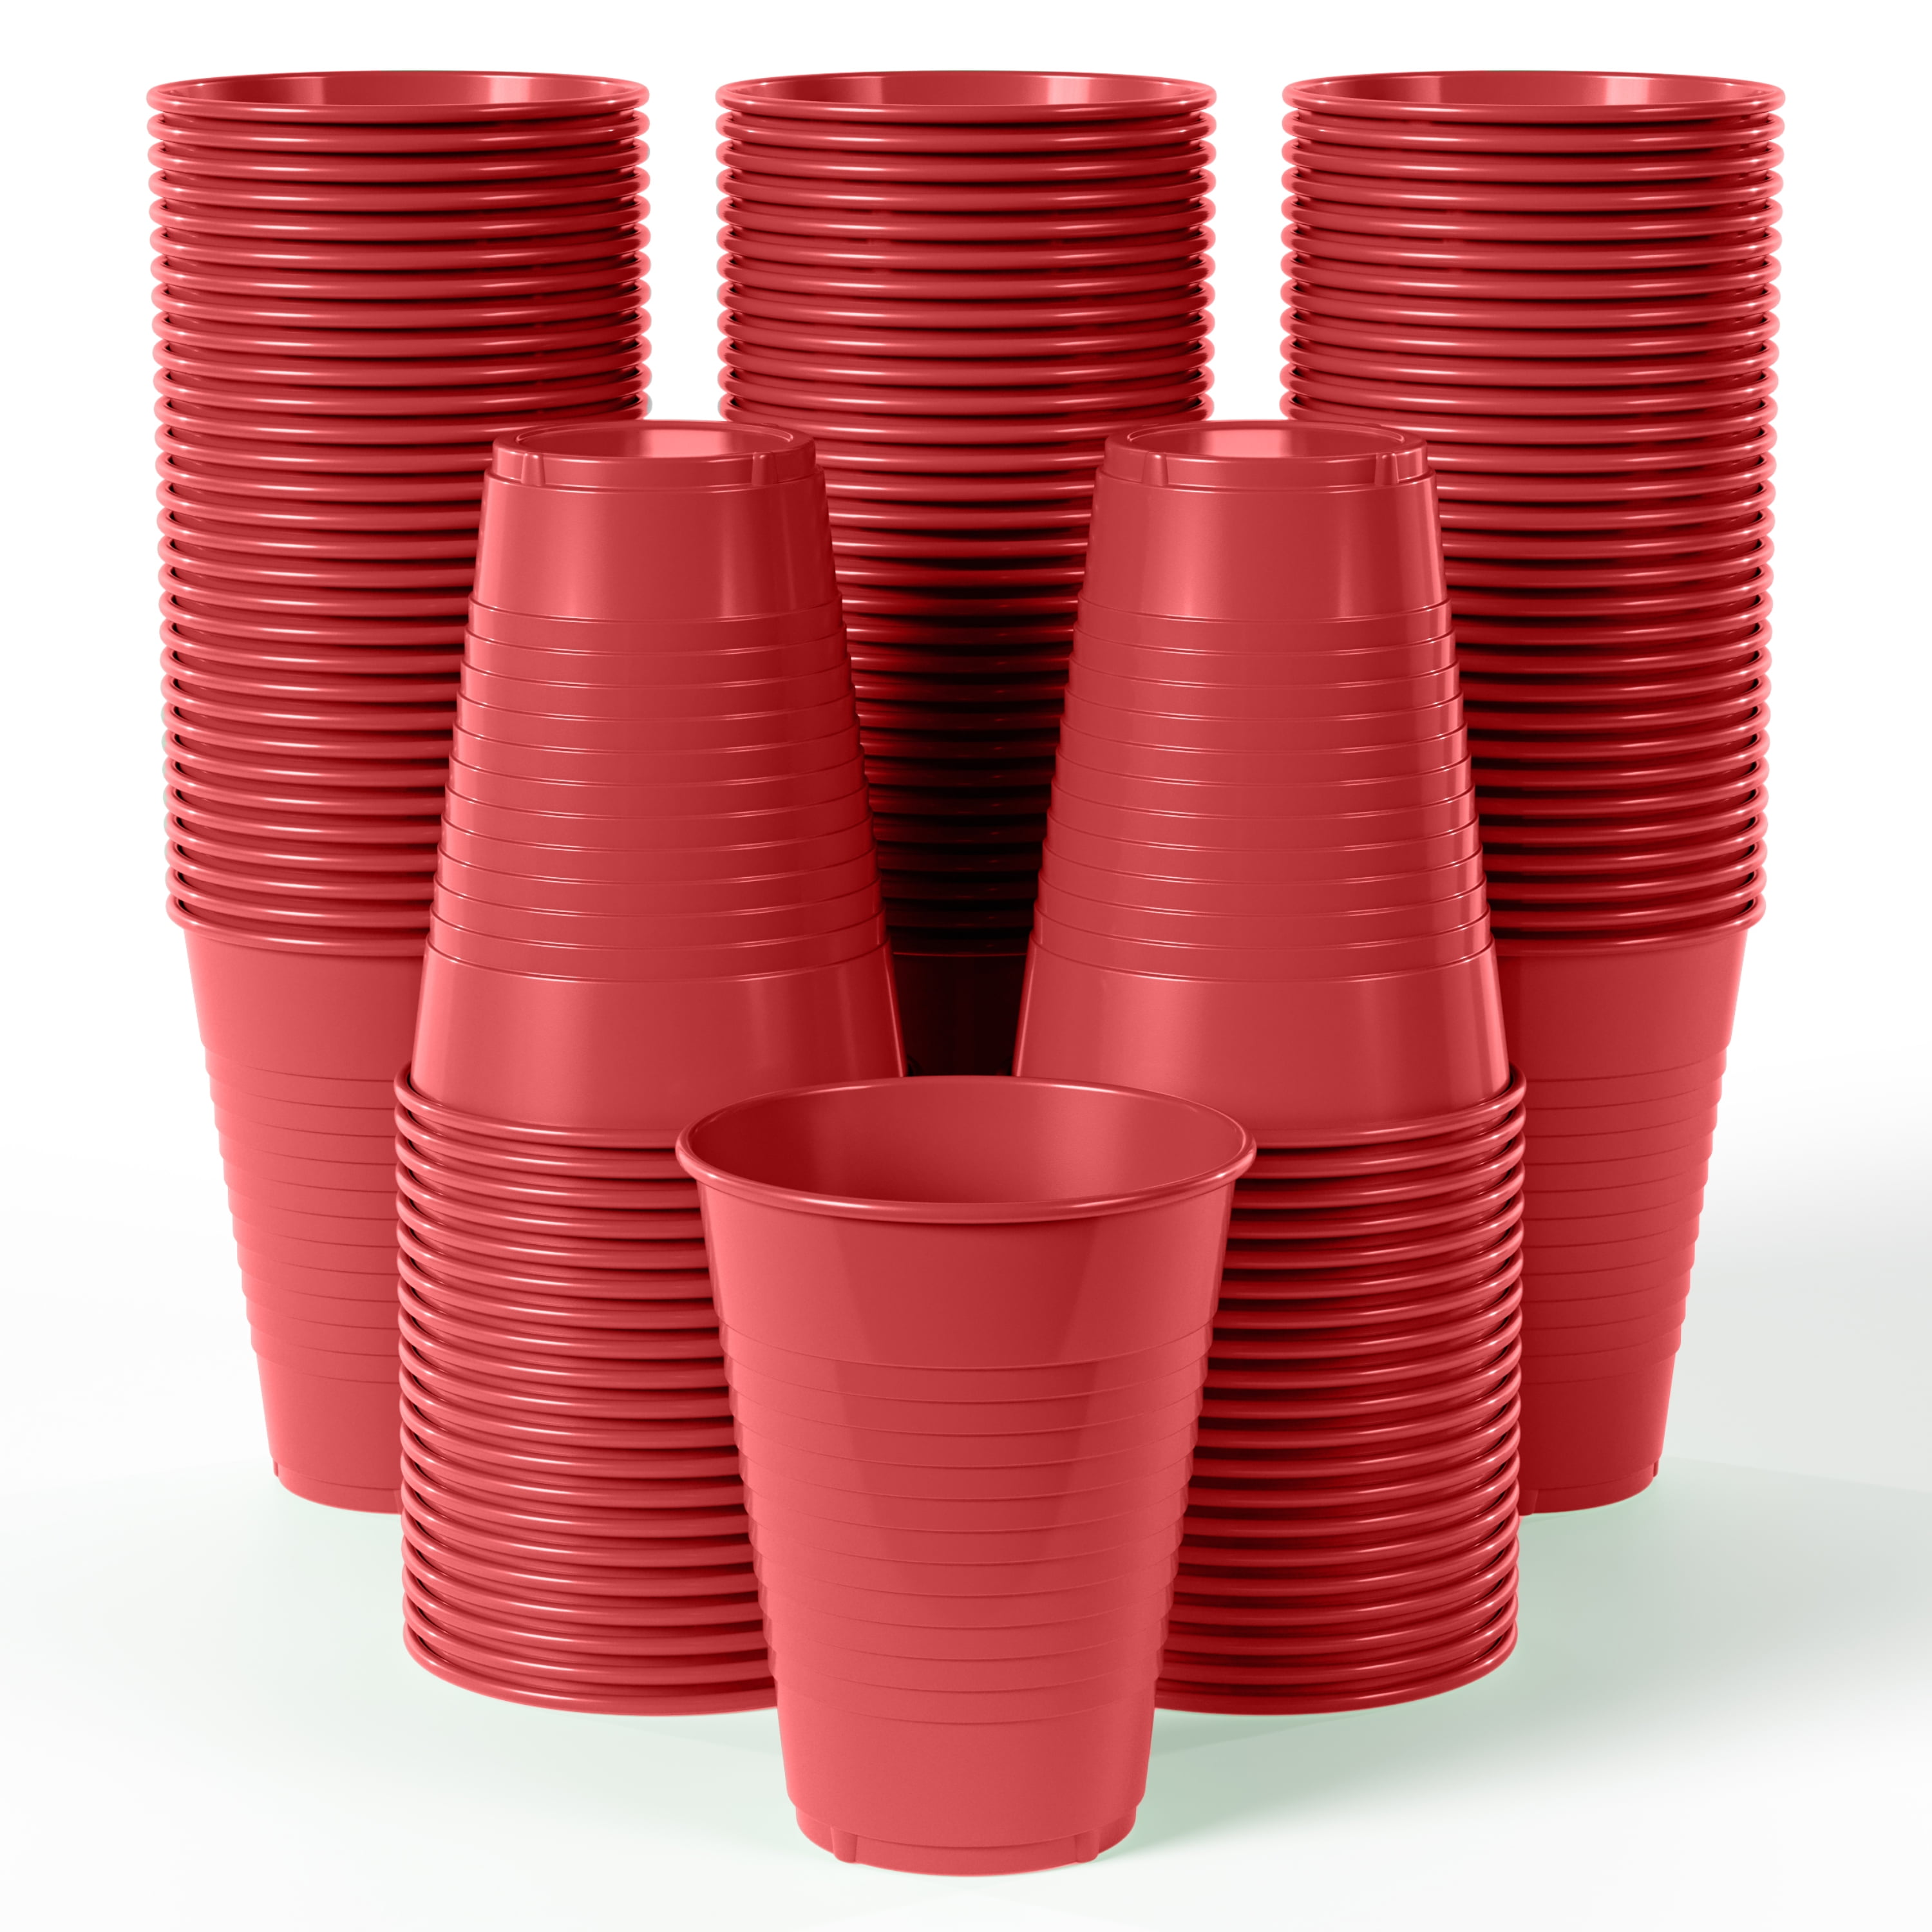 Glad Everyday Disposable Plastic Cups for Everyday Use | Red Plastic Cups  Strong and Sturdy Red Plas…See more Glad Everyday Disposable Plastic Cups